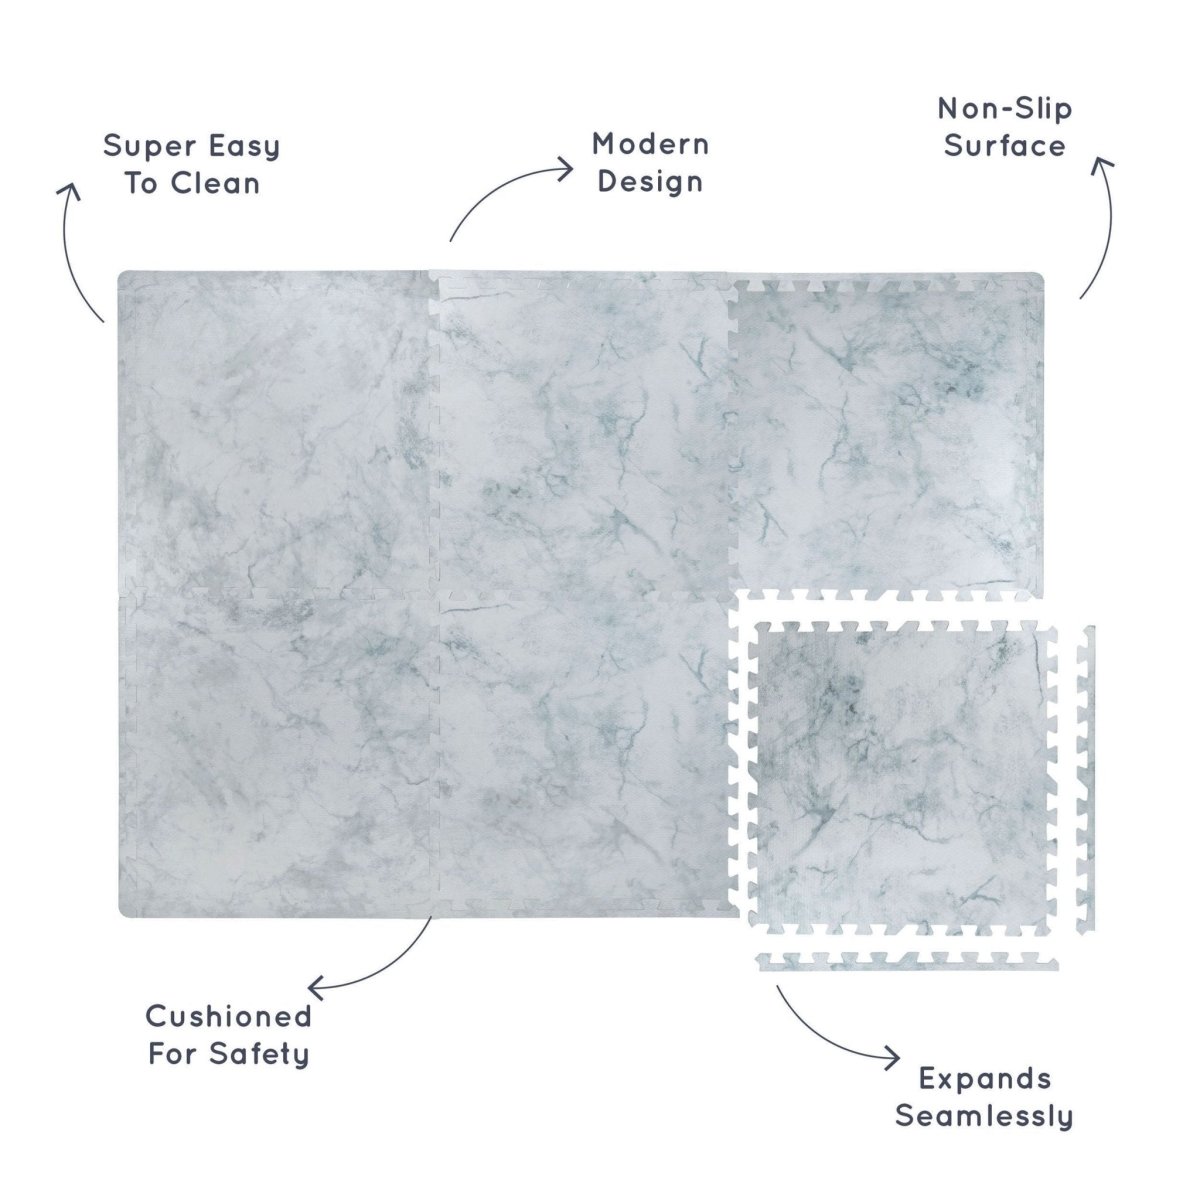 Kind and Me Aqua Blue Set in White Playmat- Marble - MA-WH-BL